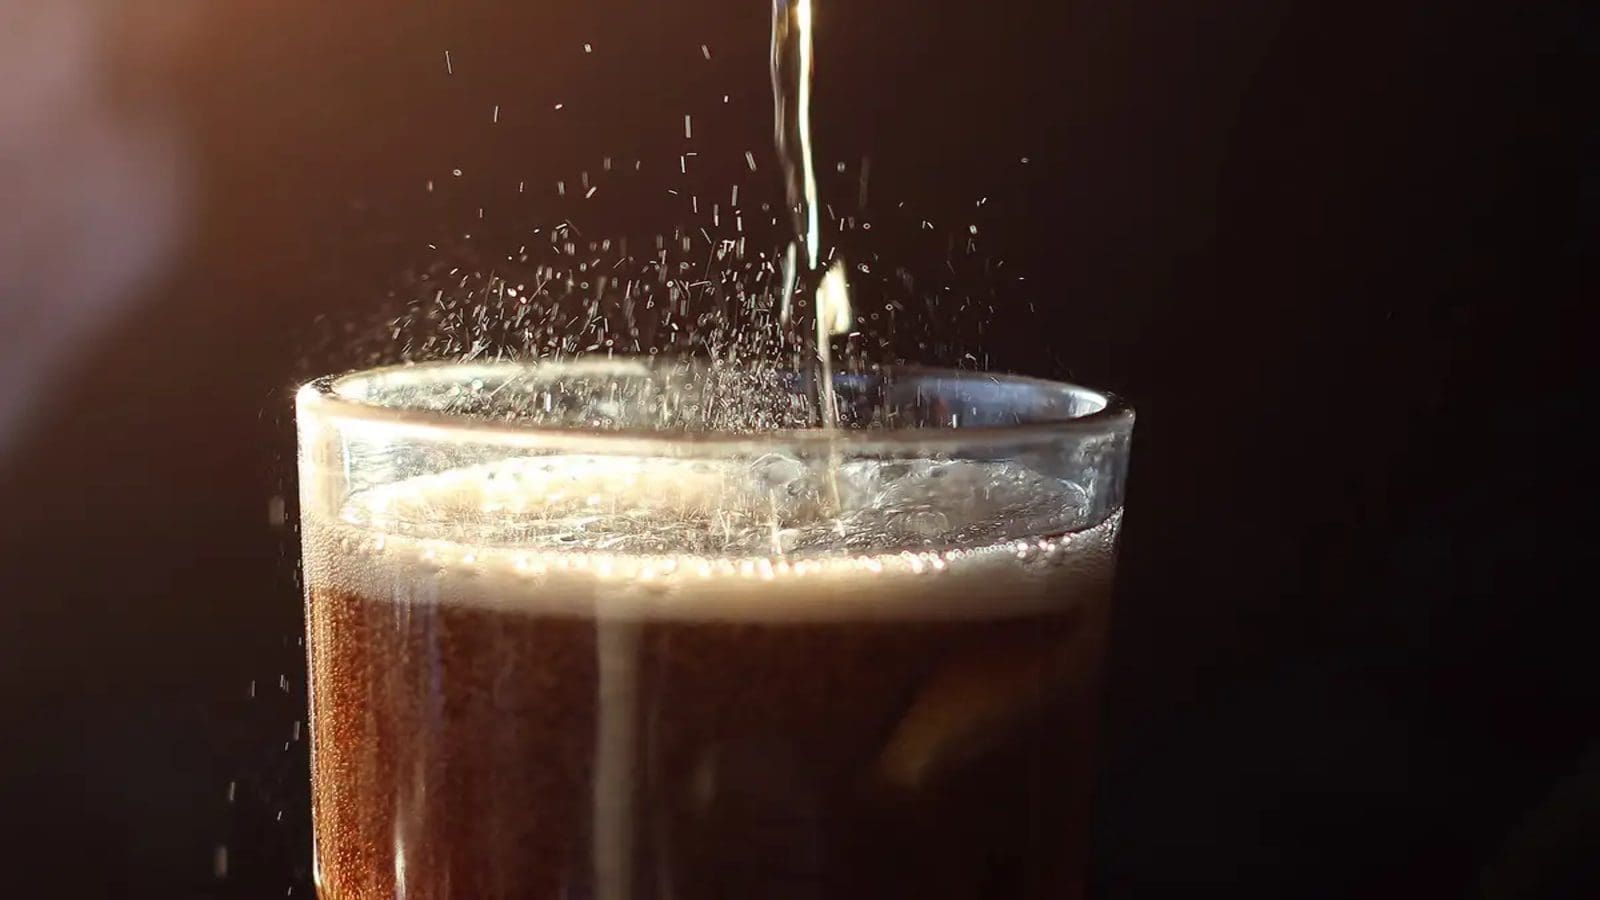 UK breweries call for swift intervention to prevent disruptions in CO2 and beer supply